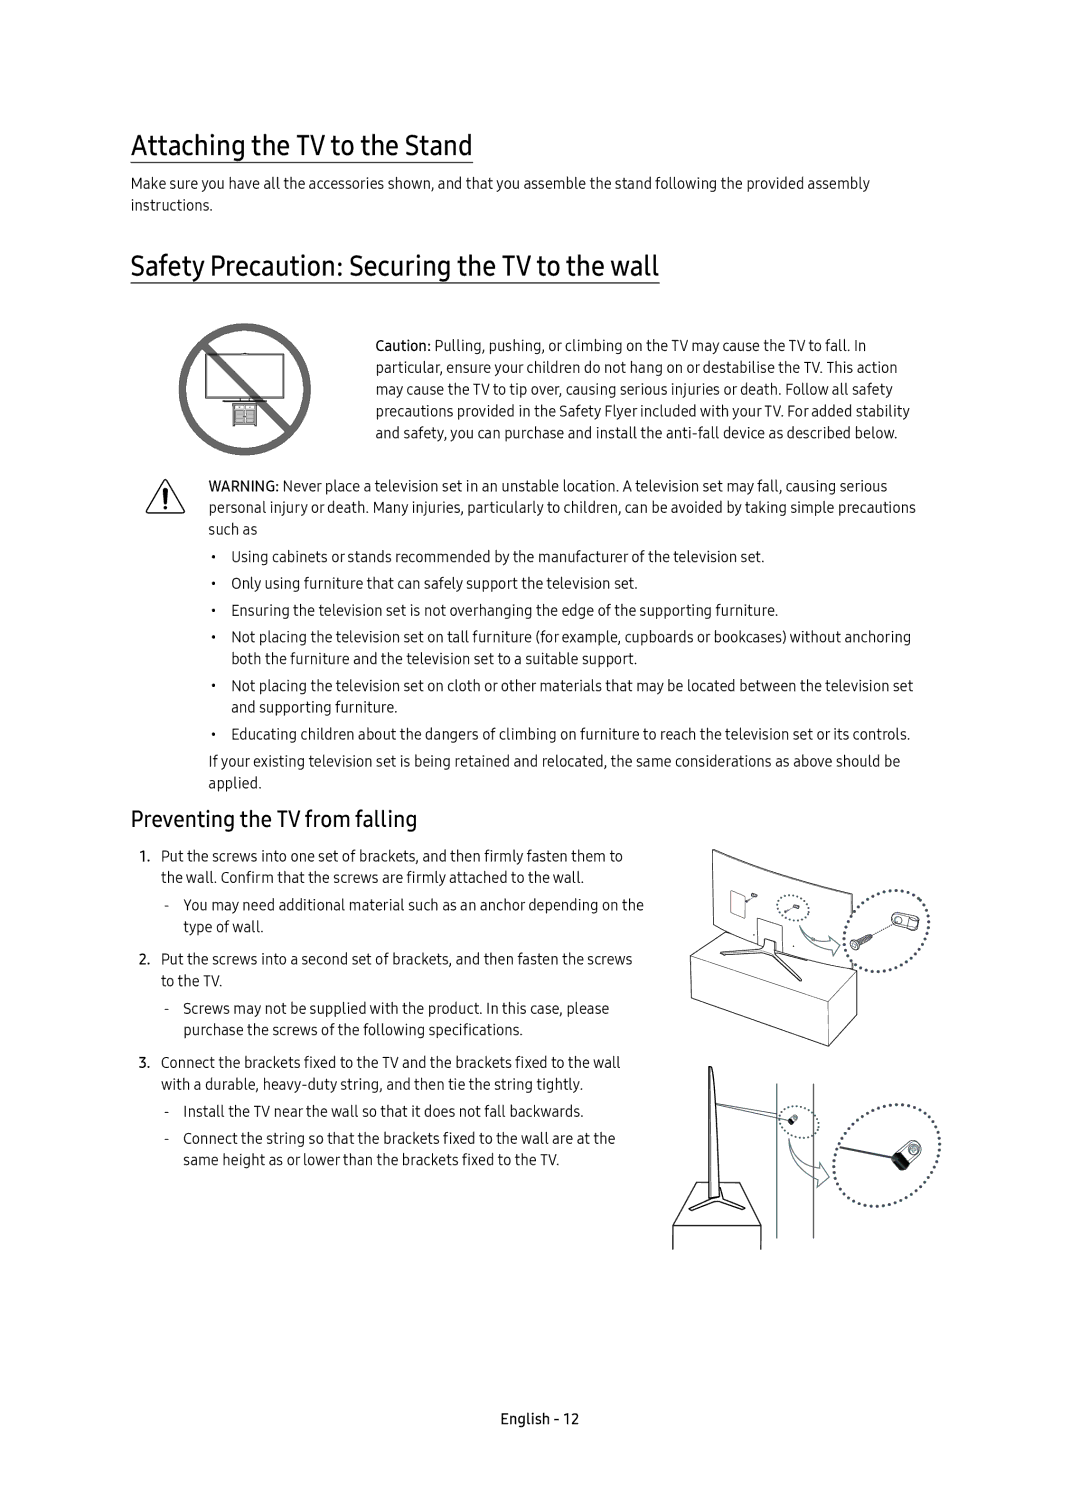 Samsung UE78KU6500UXZT, UE78KU6500UXXC manual Attaching the TV to the Stand, Safety Precaution Securing the TV to the wall 